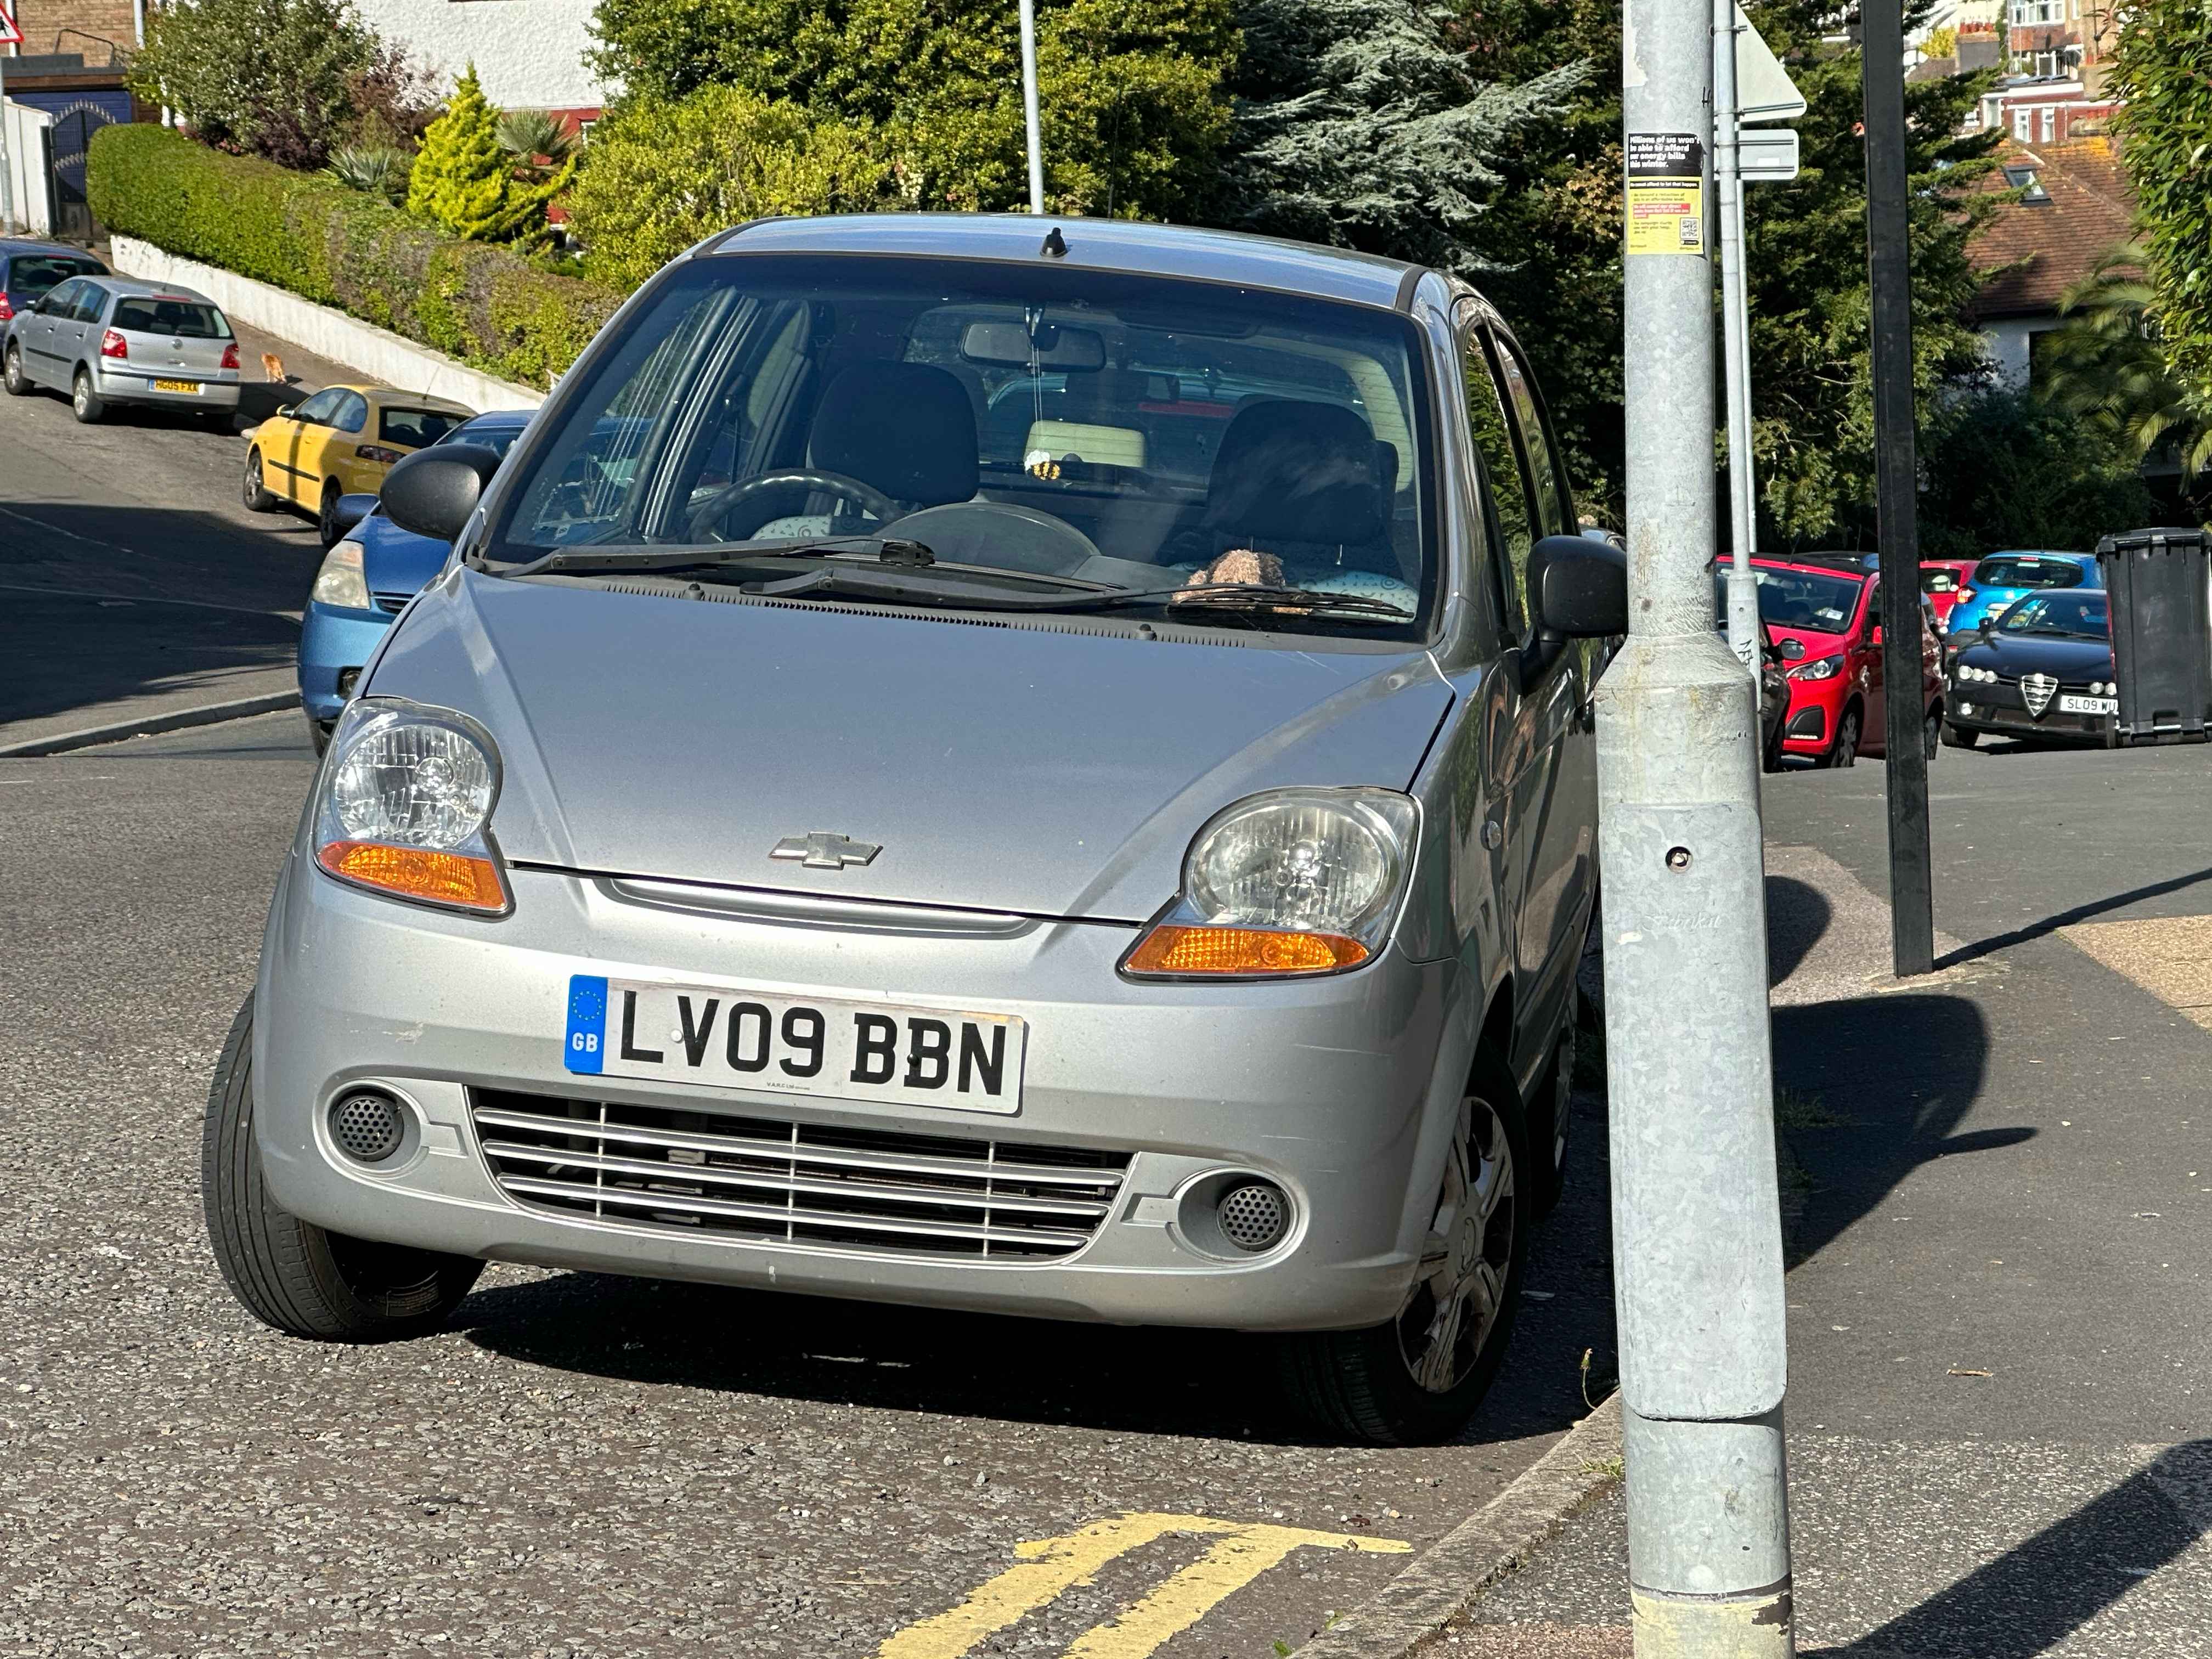 Photograph of LV09 BBN - a Silver Chevrolet Matiz parked in Hollingdean by a non-resident. The first of three photographs supplied by the residents of Hollingdean.